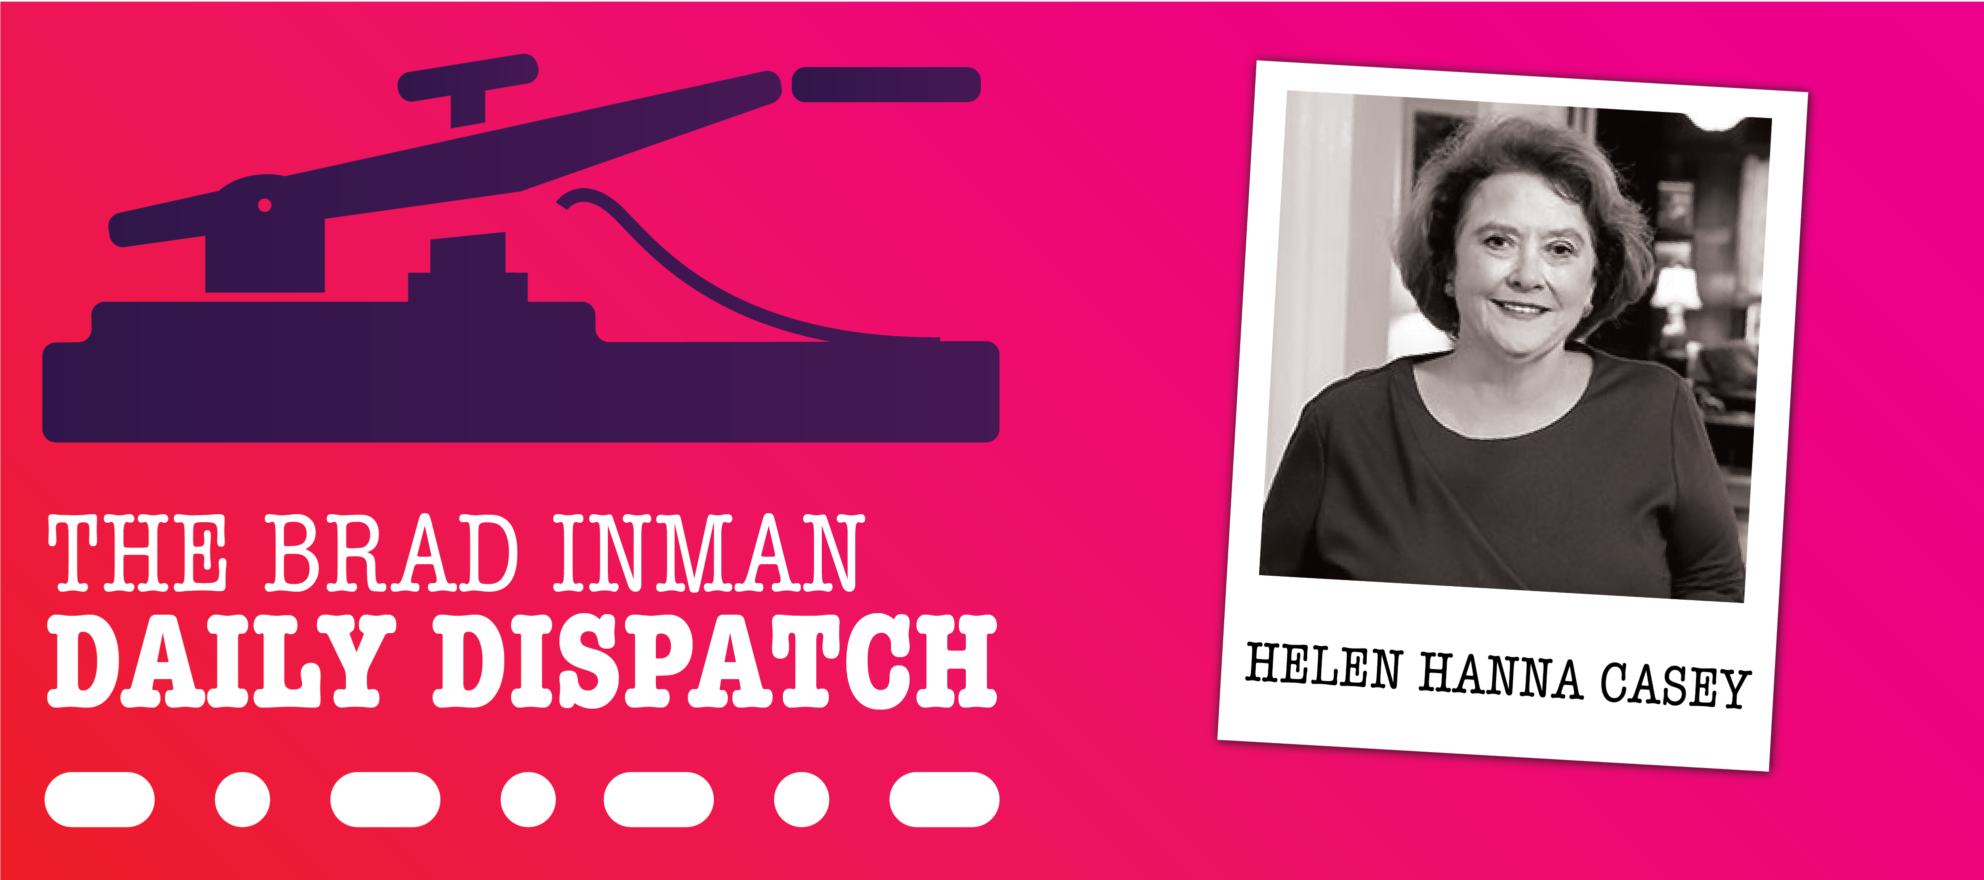 Daily Dispatch: Brad Inman with Helen Hanna Casey